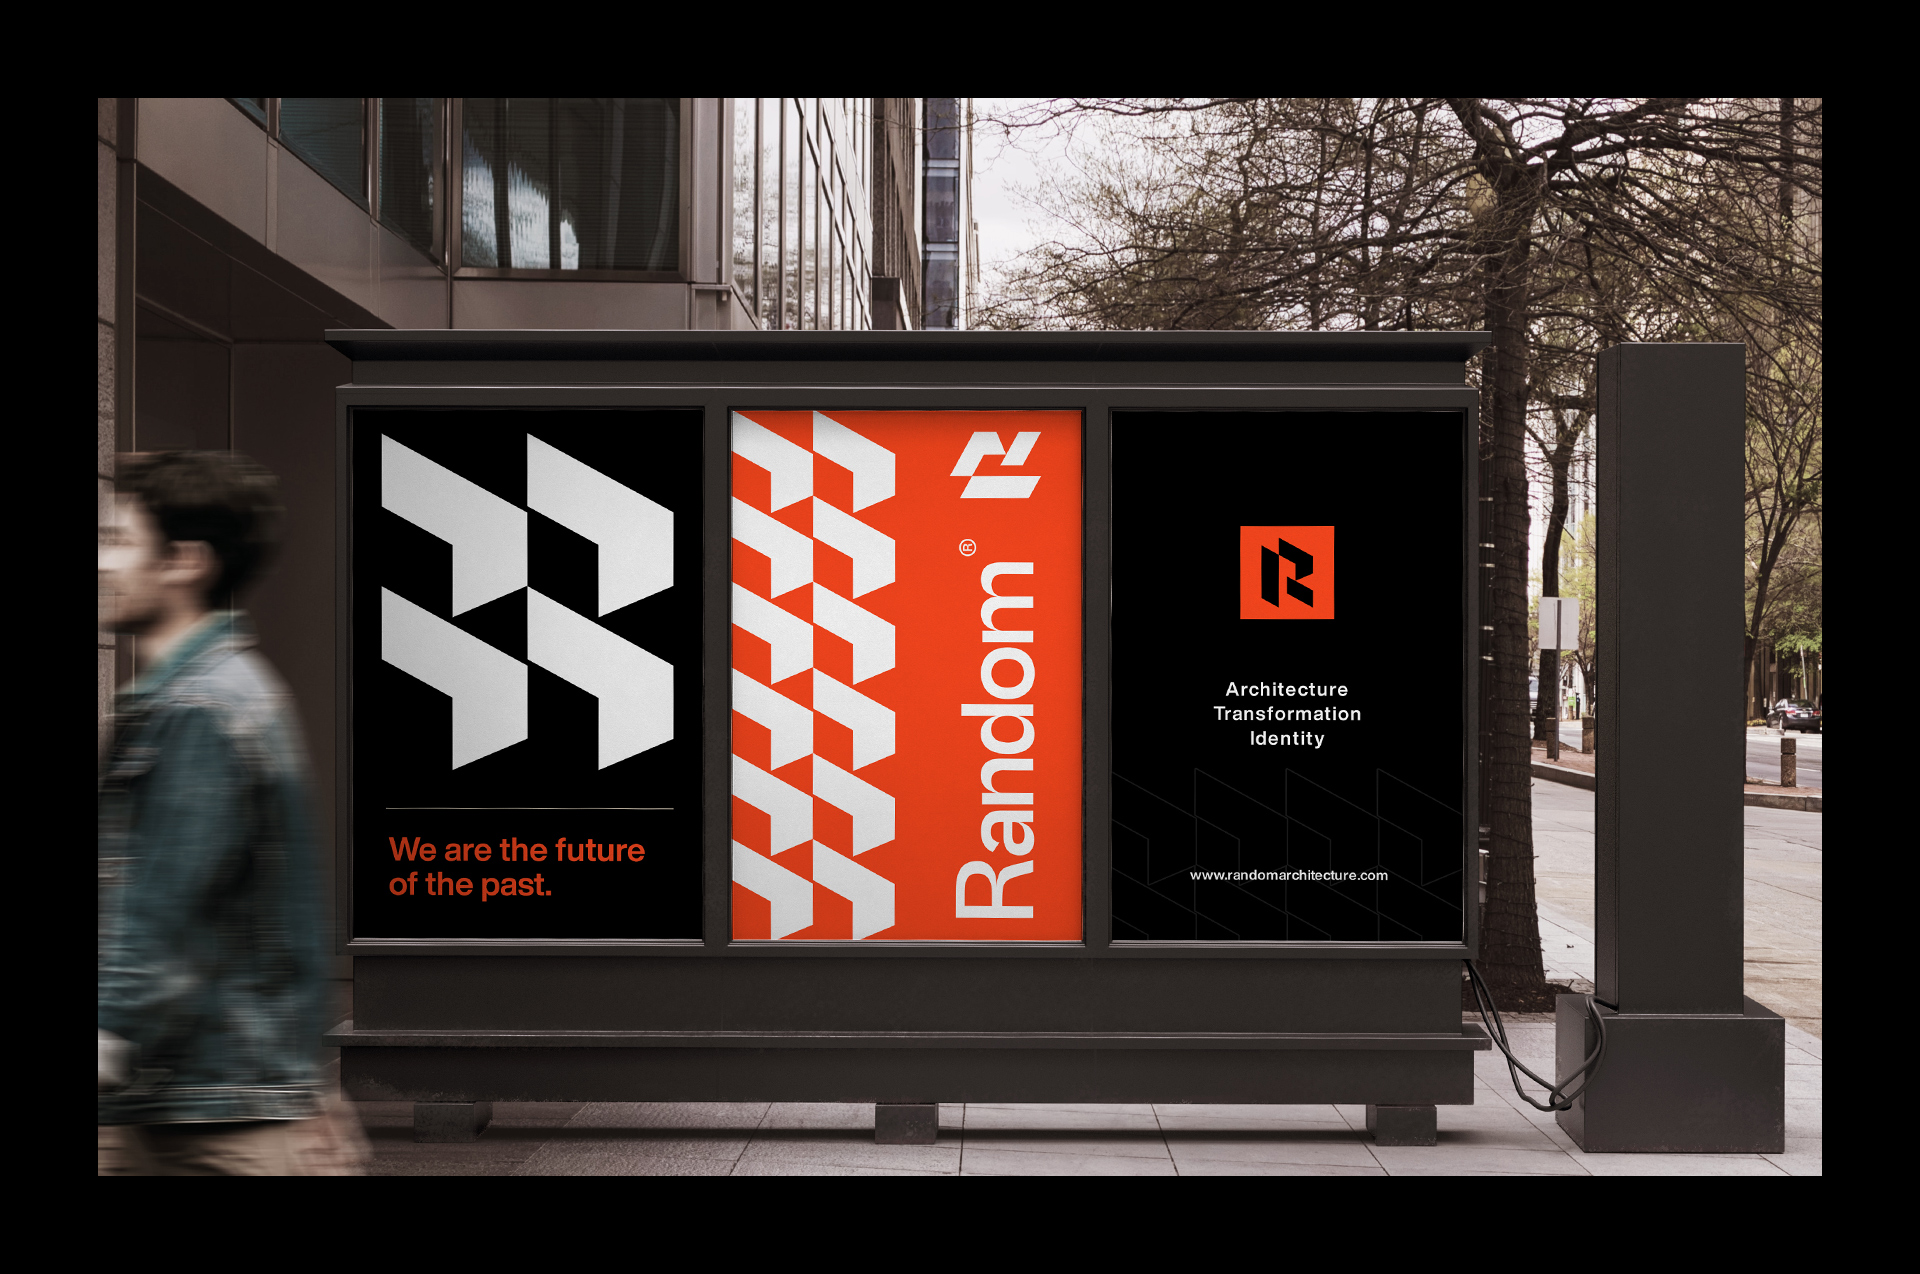 Bruna from Studio Blumer Creates Visual Identity Concept for an Architecture and Interiors Firm